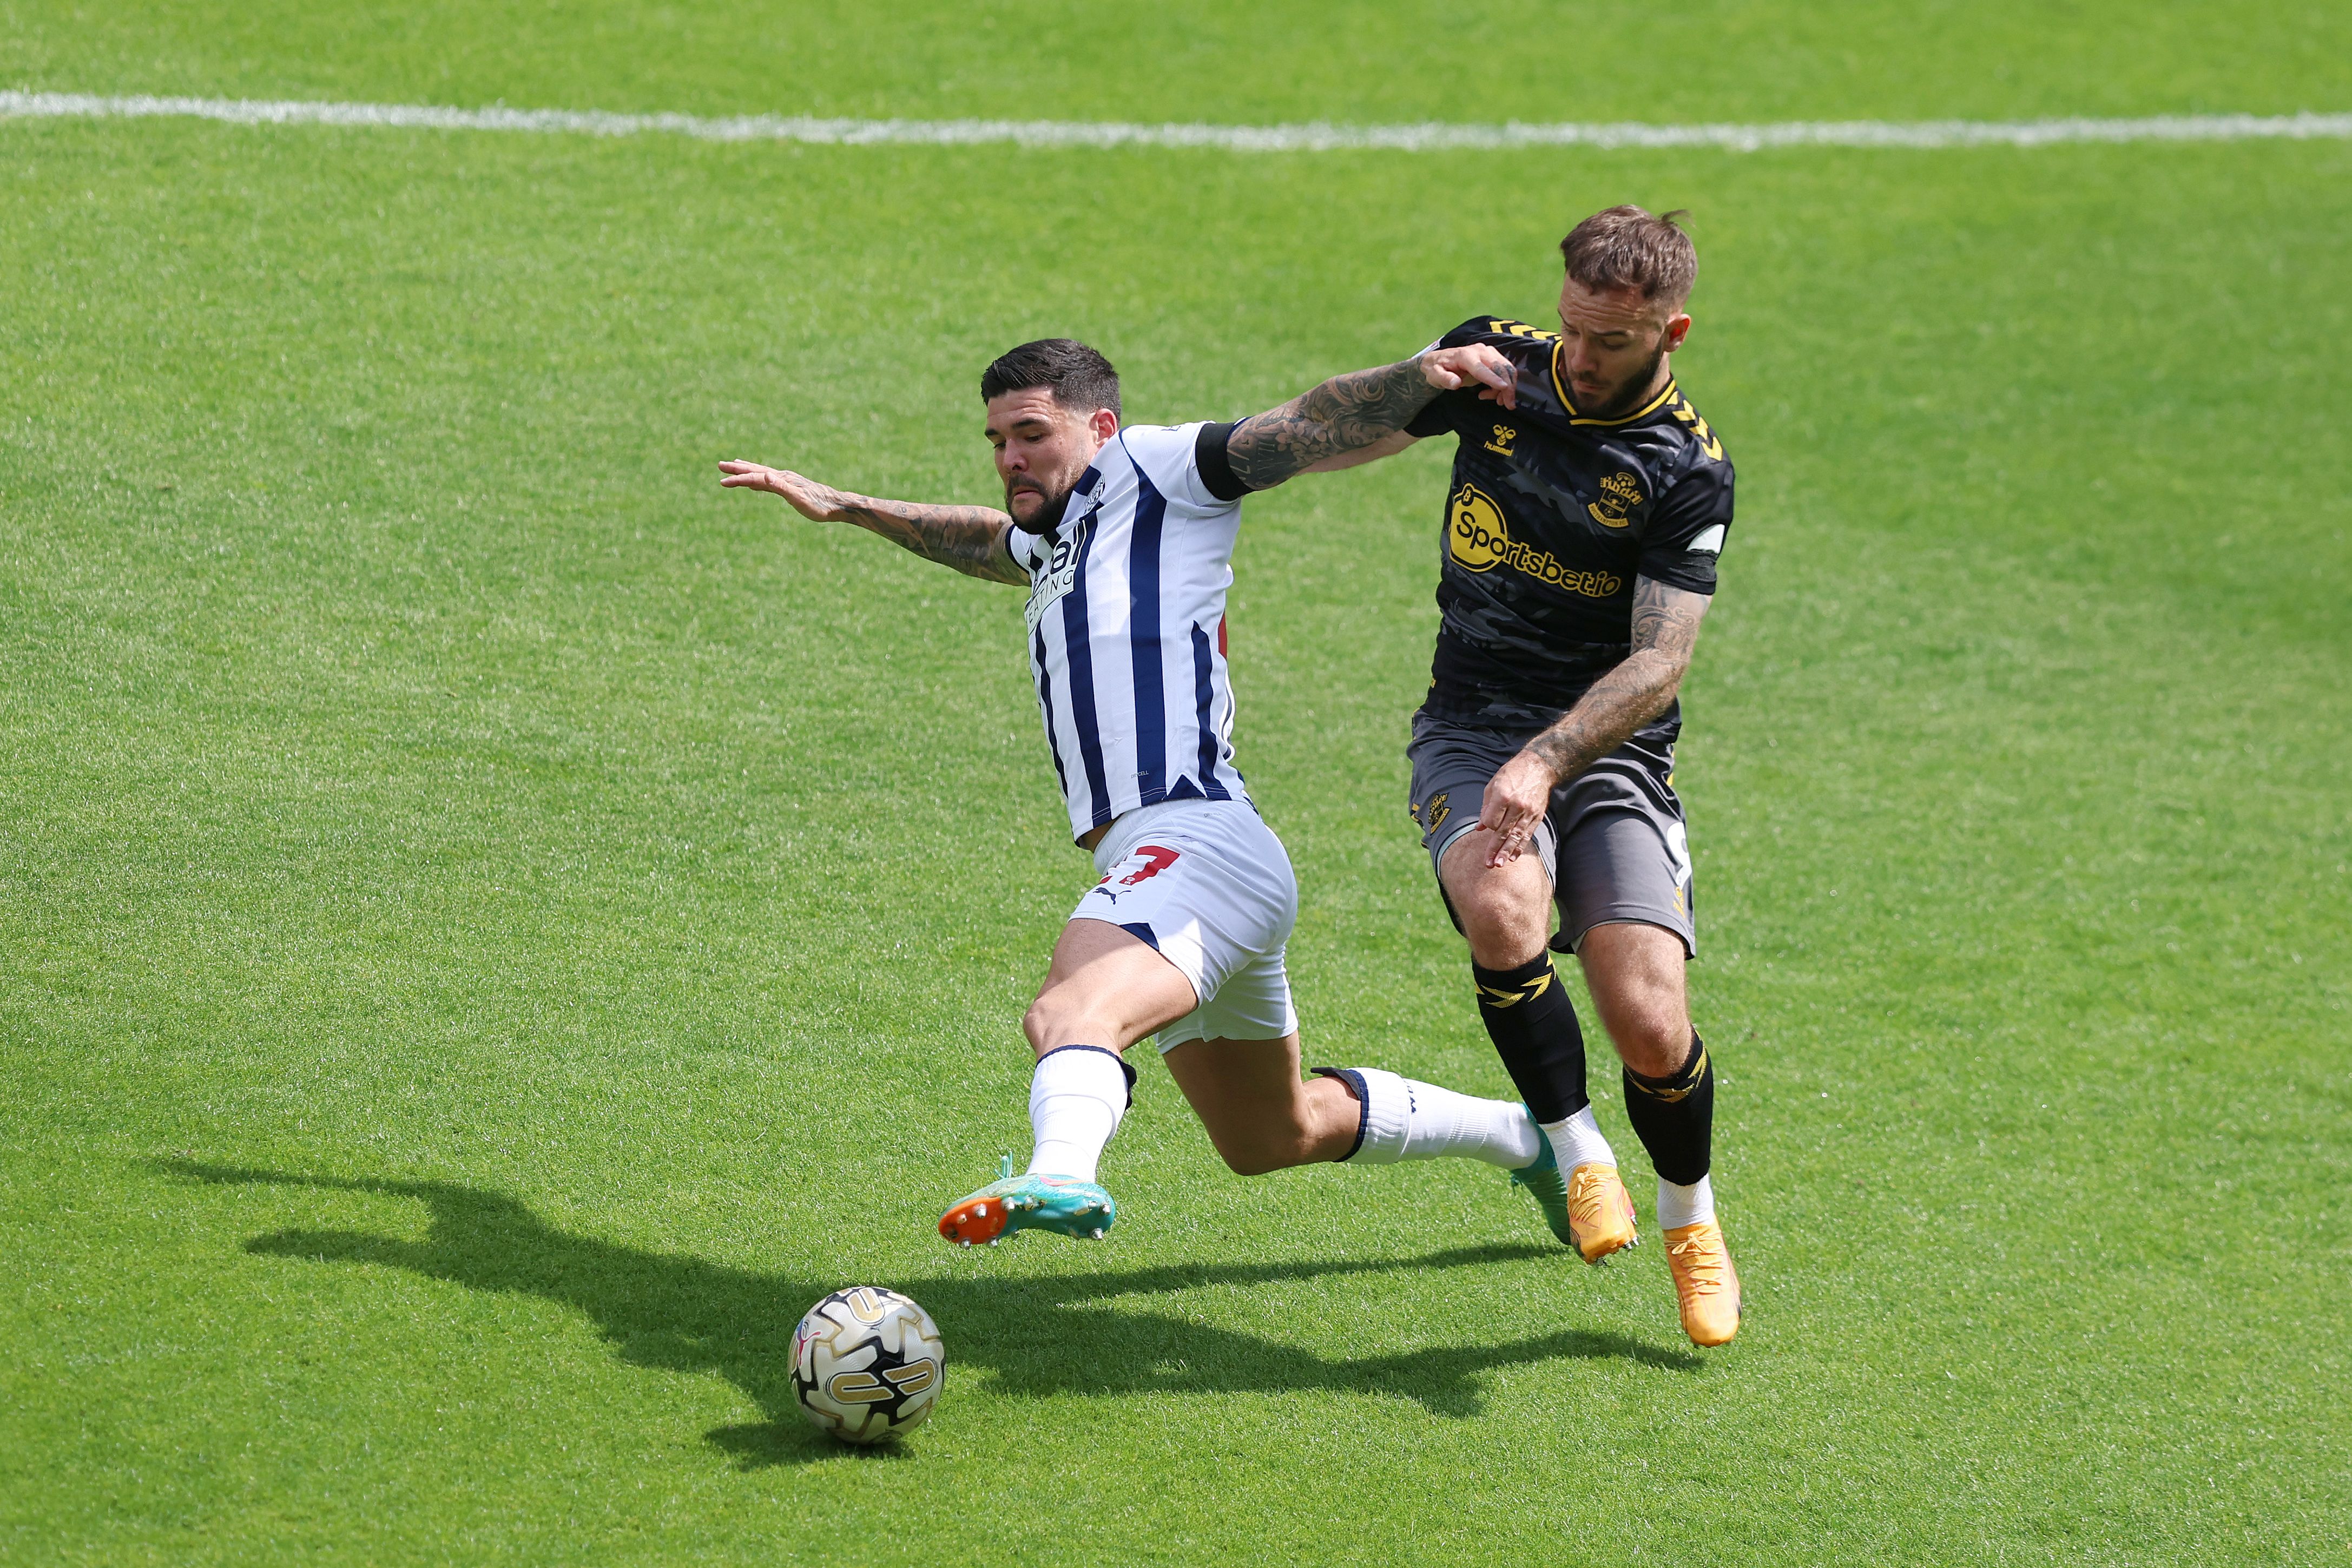 Alex Mowatt stretches to win the ball against Southampton at The Hawthorns 